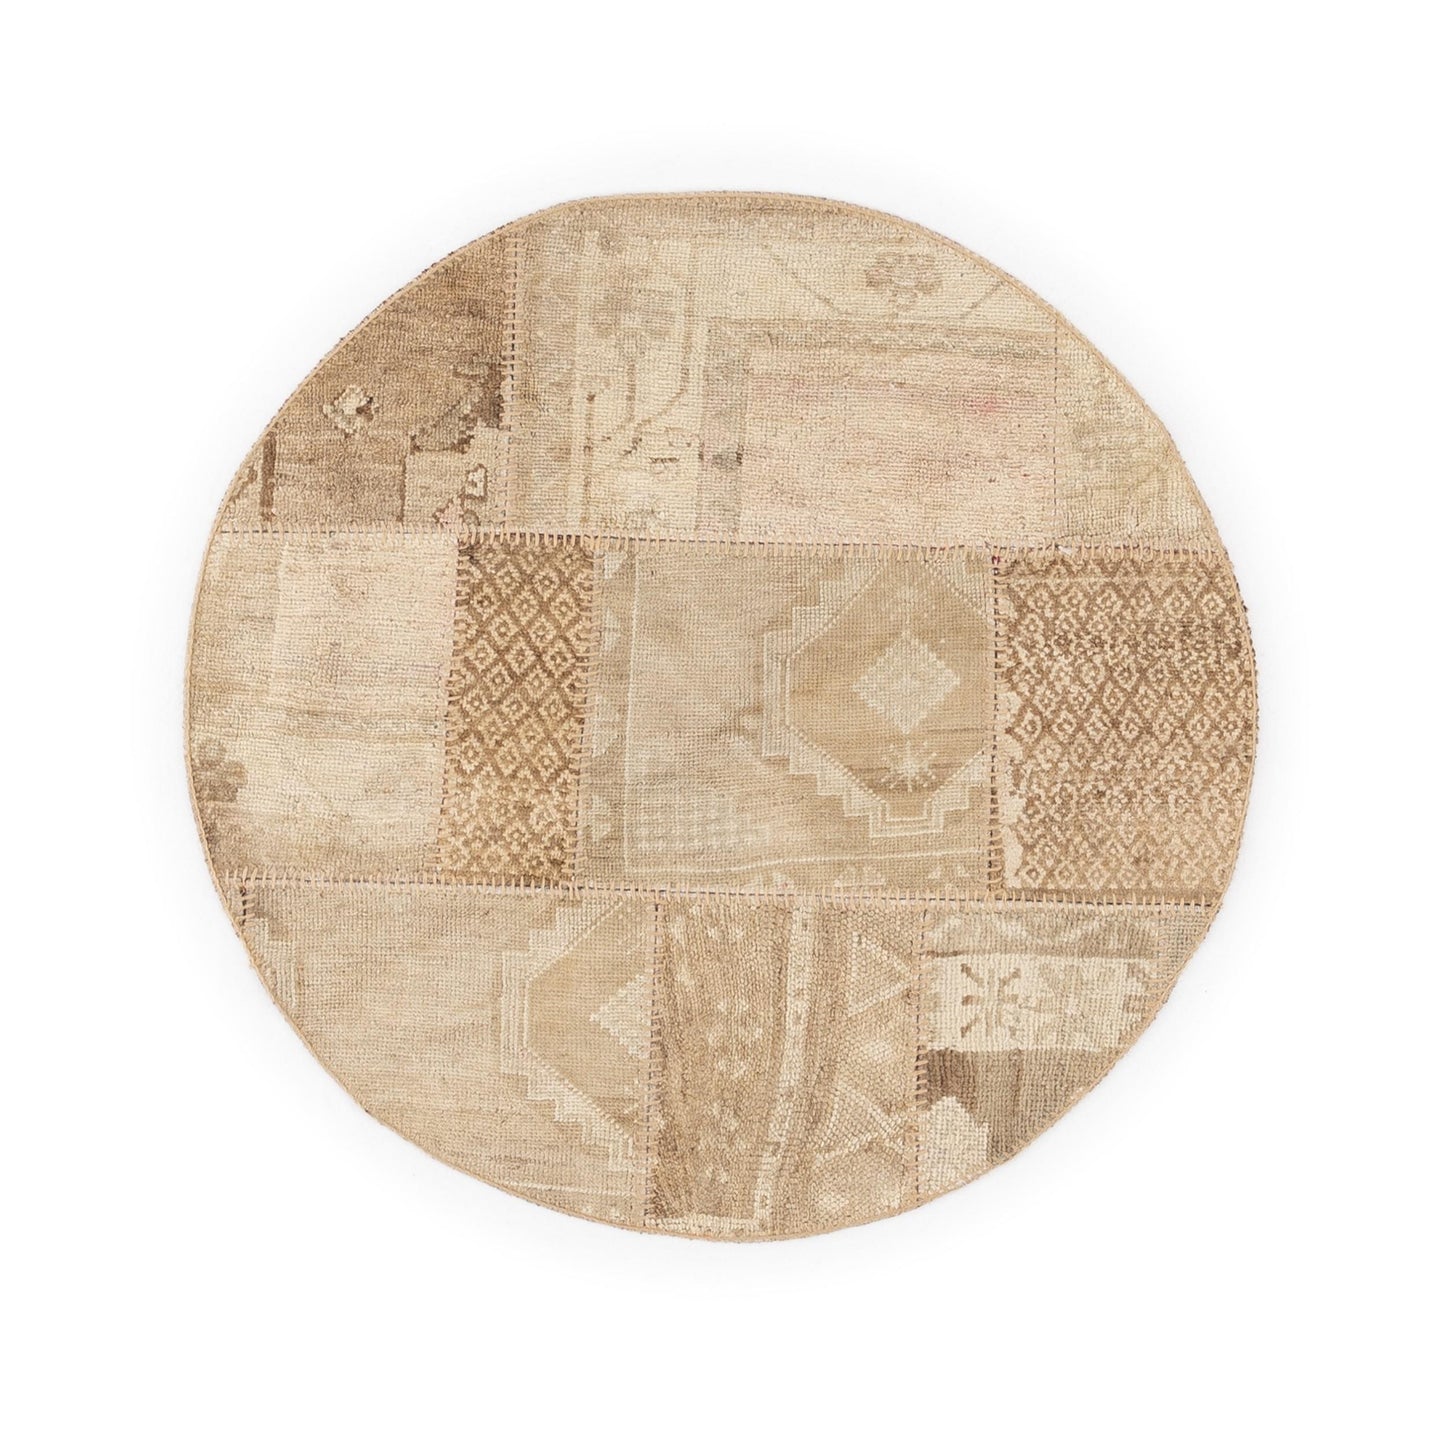 Oriental Round Rug Patchwork Hand Knotted Wool On Wool 114 x 116 Cm – 3' 9'' x 3' 10'' Sand C007 ER01